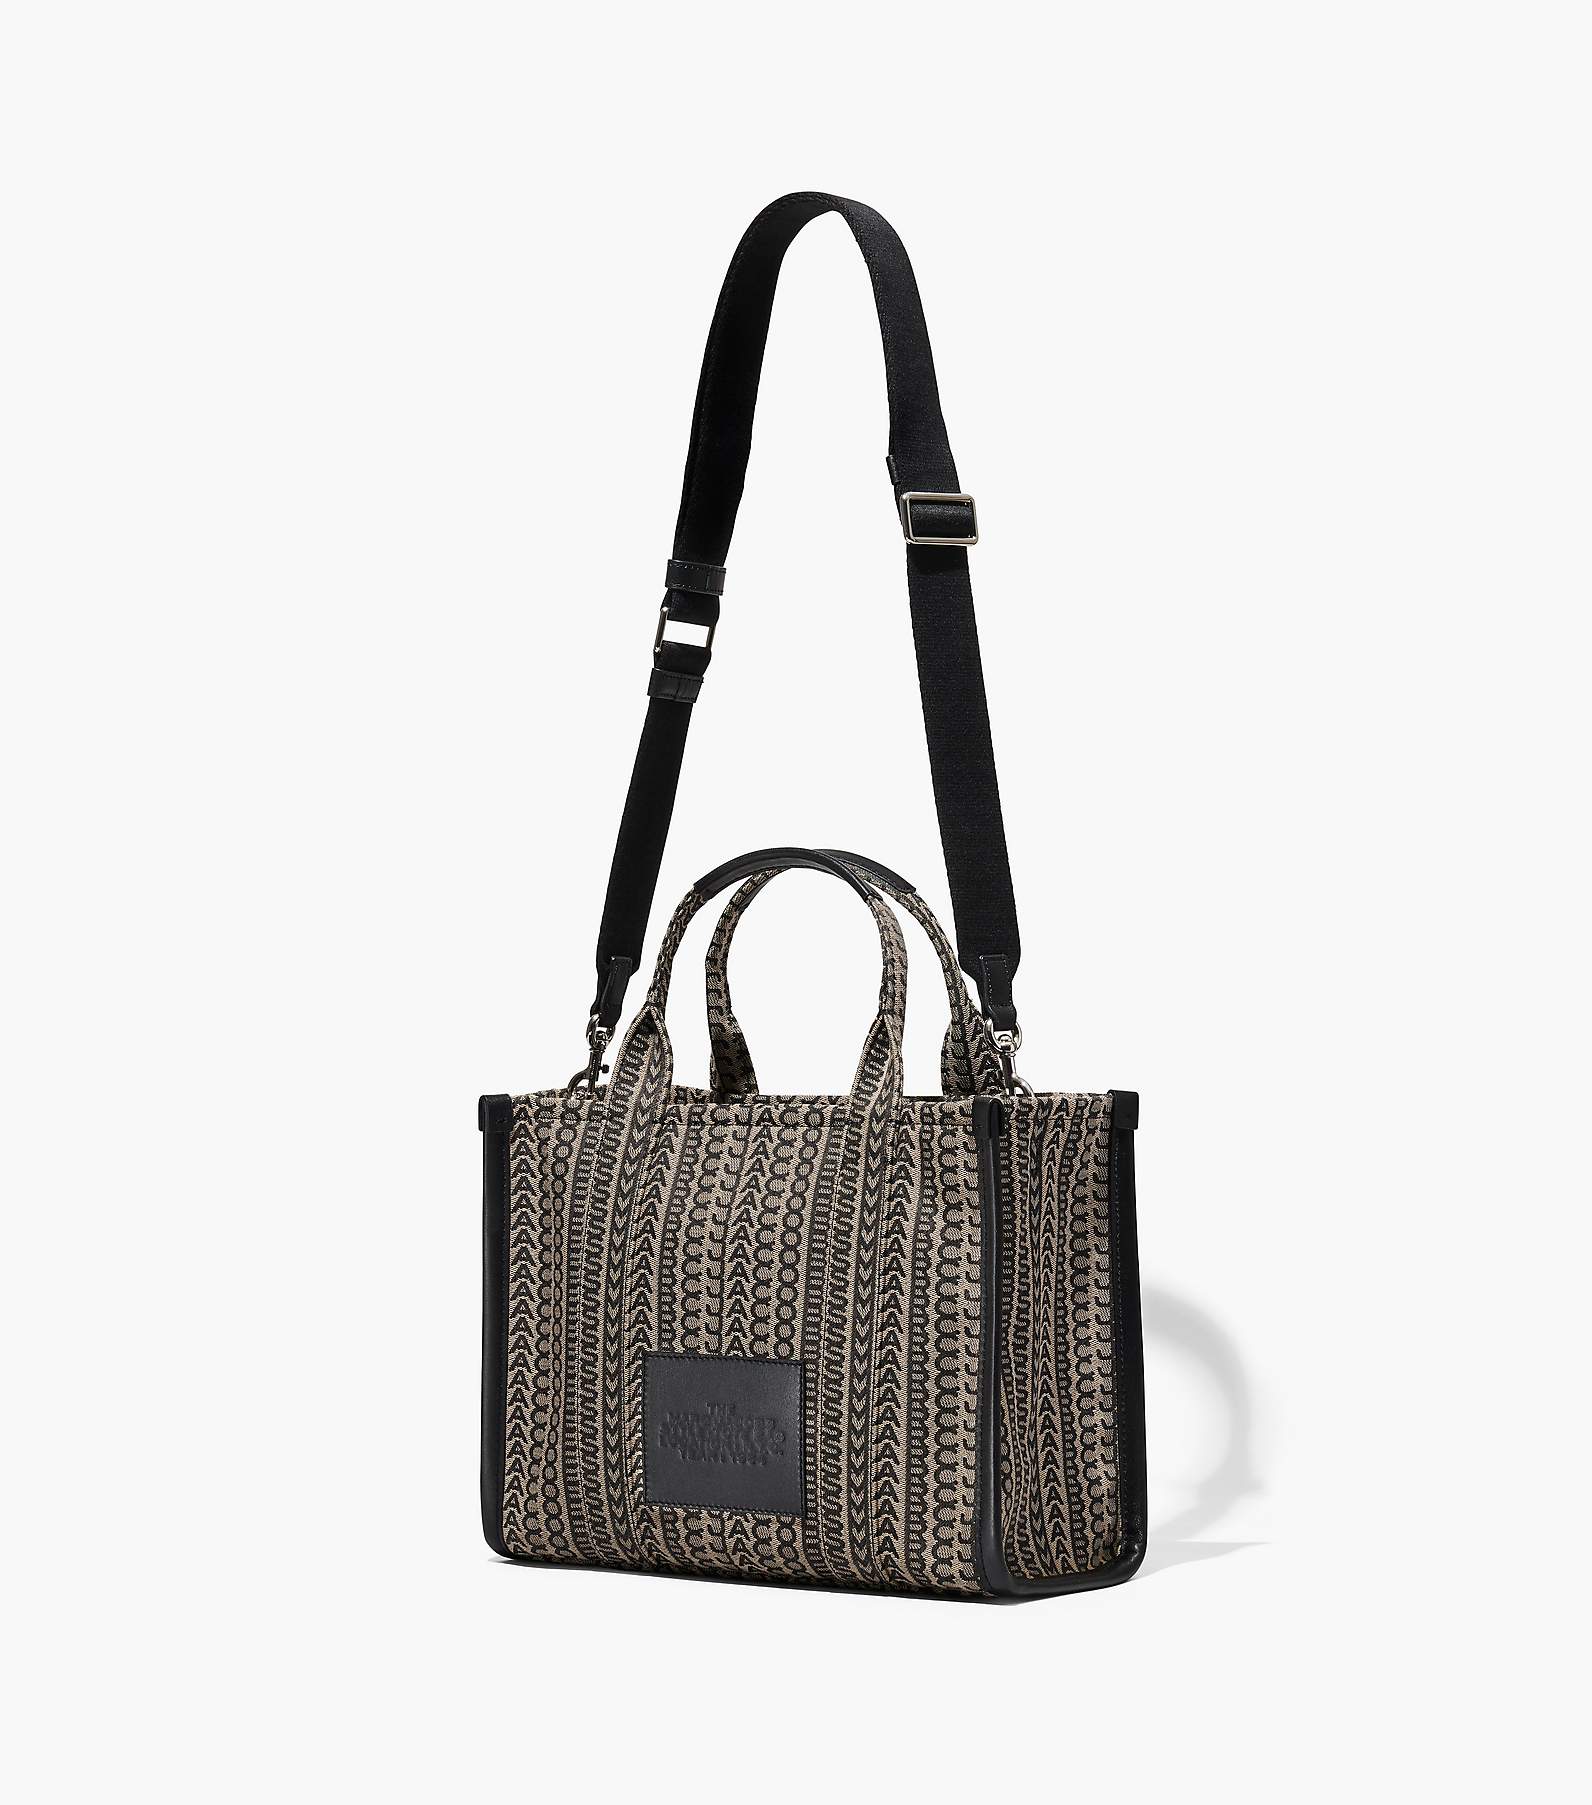 The Monogram Large Tote Bag, Marc Jacobs